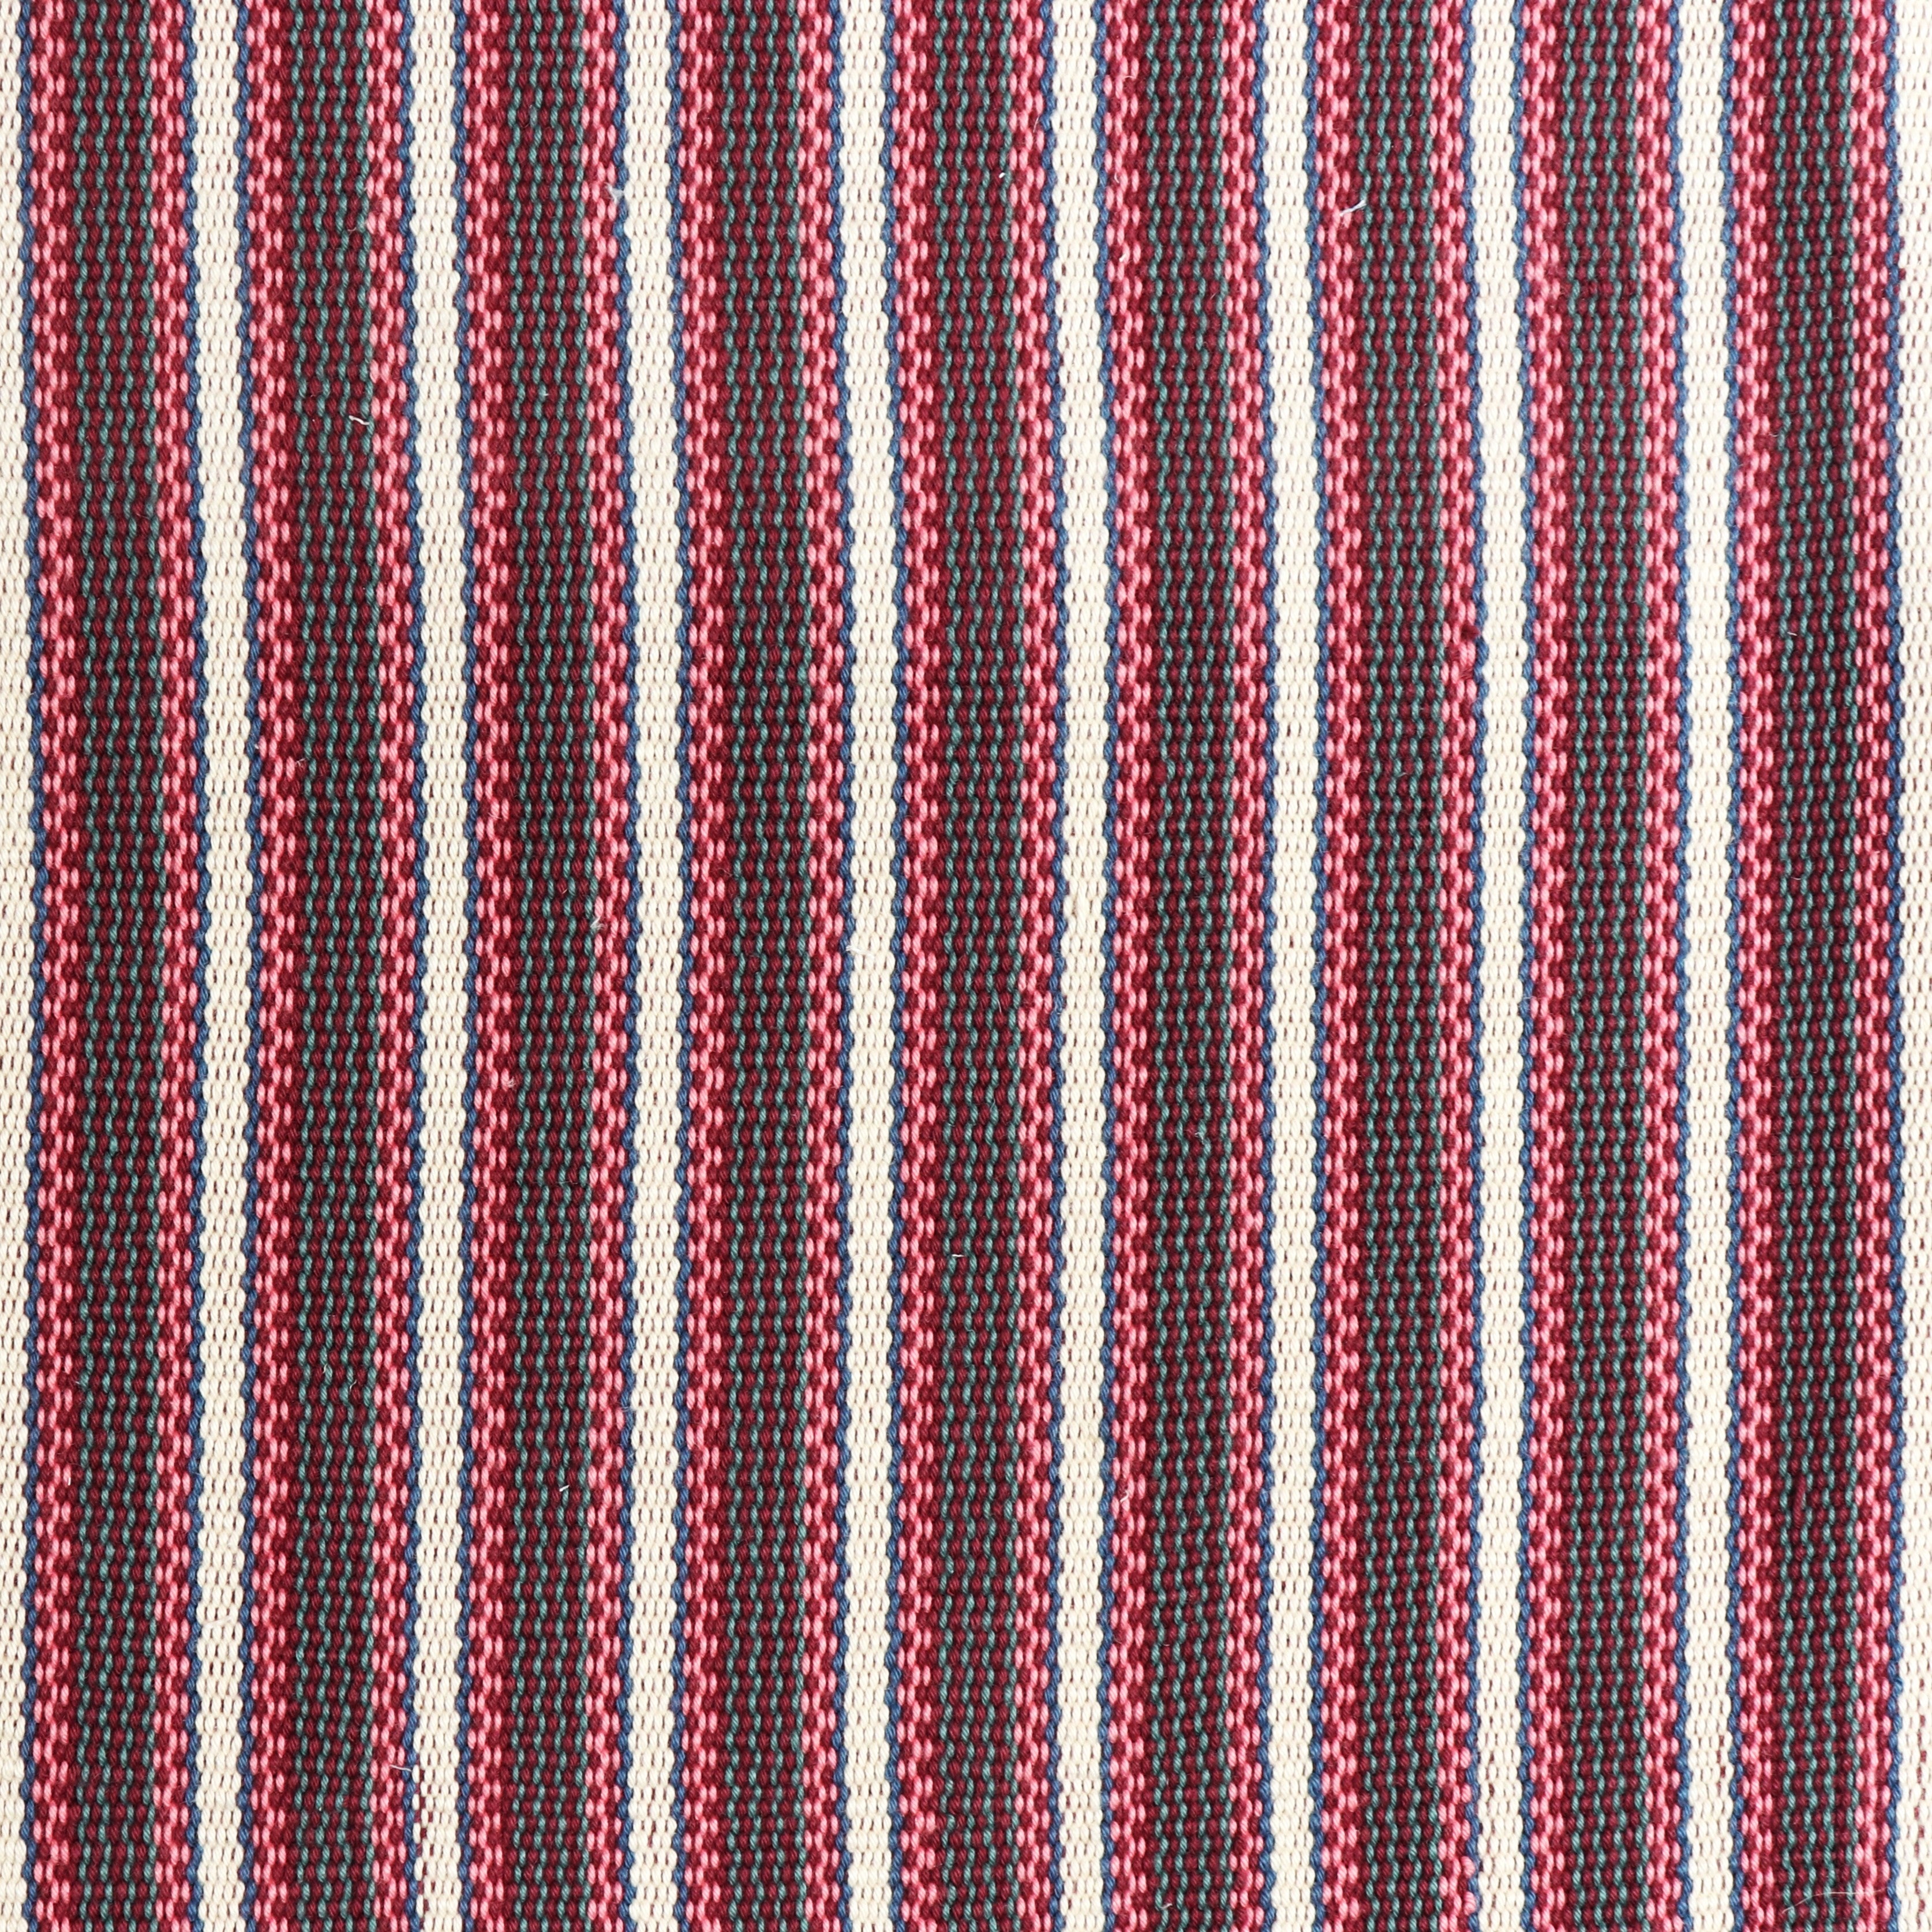 Detail of a hand-woven cotton fabric in an intricate stripe pattern in shades of pink, red, white and blue.